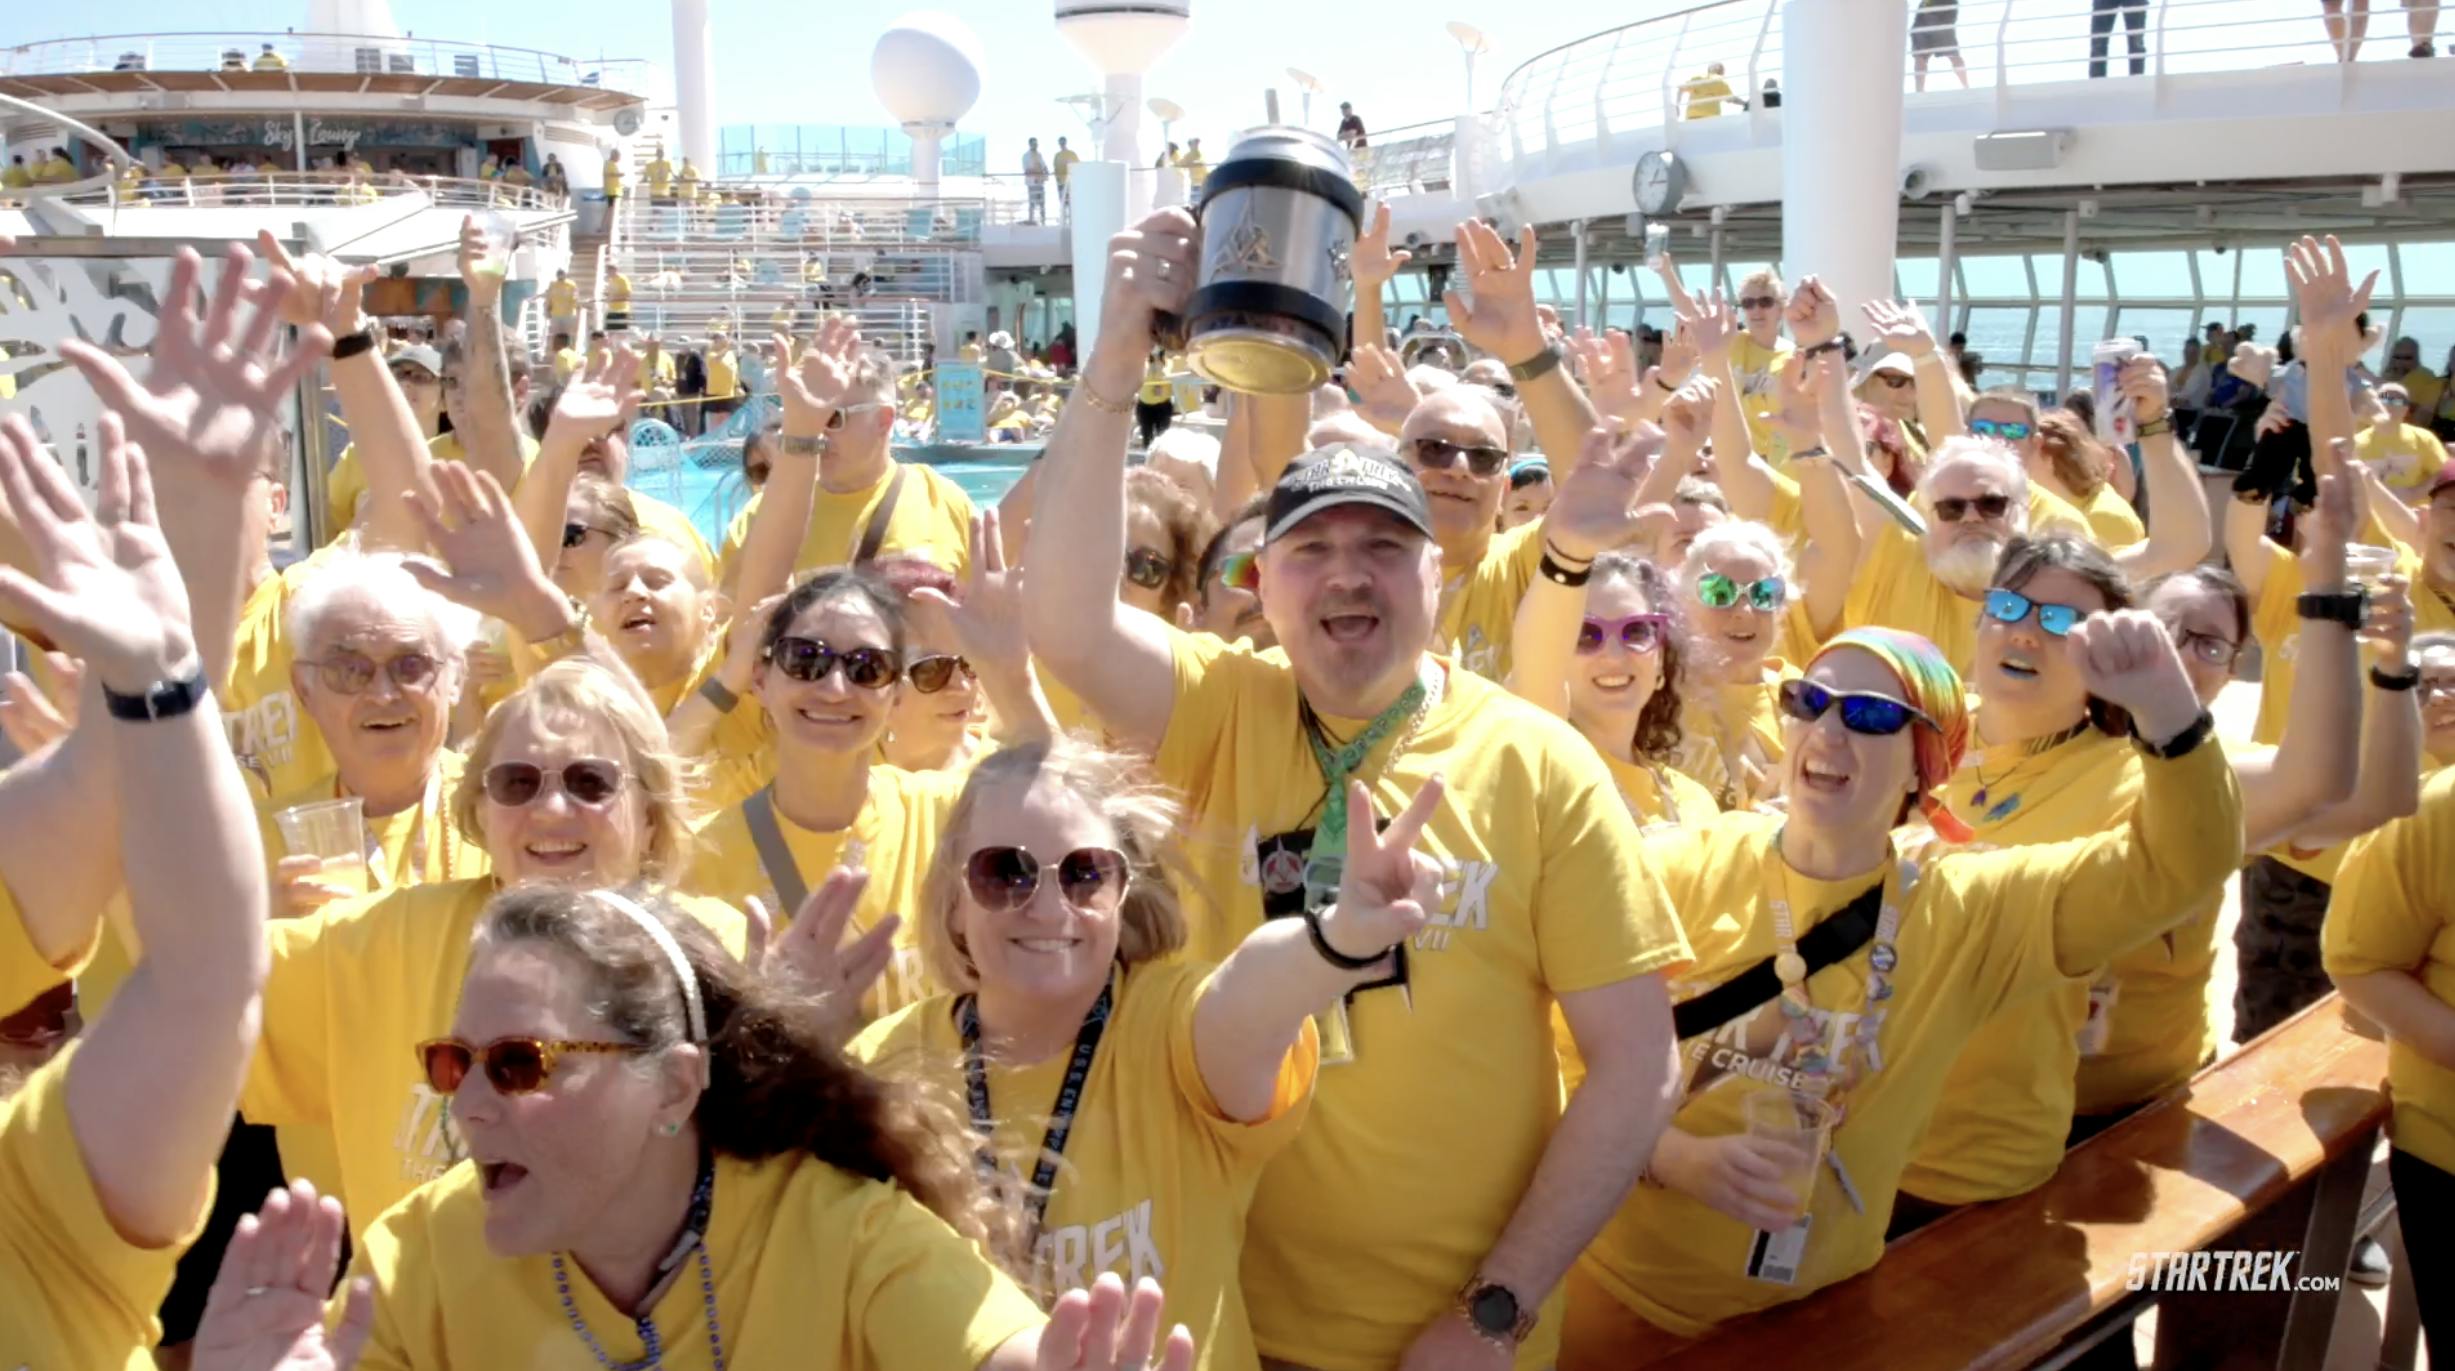 Star Trek: The Cruise VII: fans wearing yellow t-shirts celebrating on the pool deck and cheering